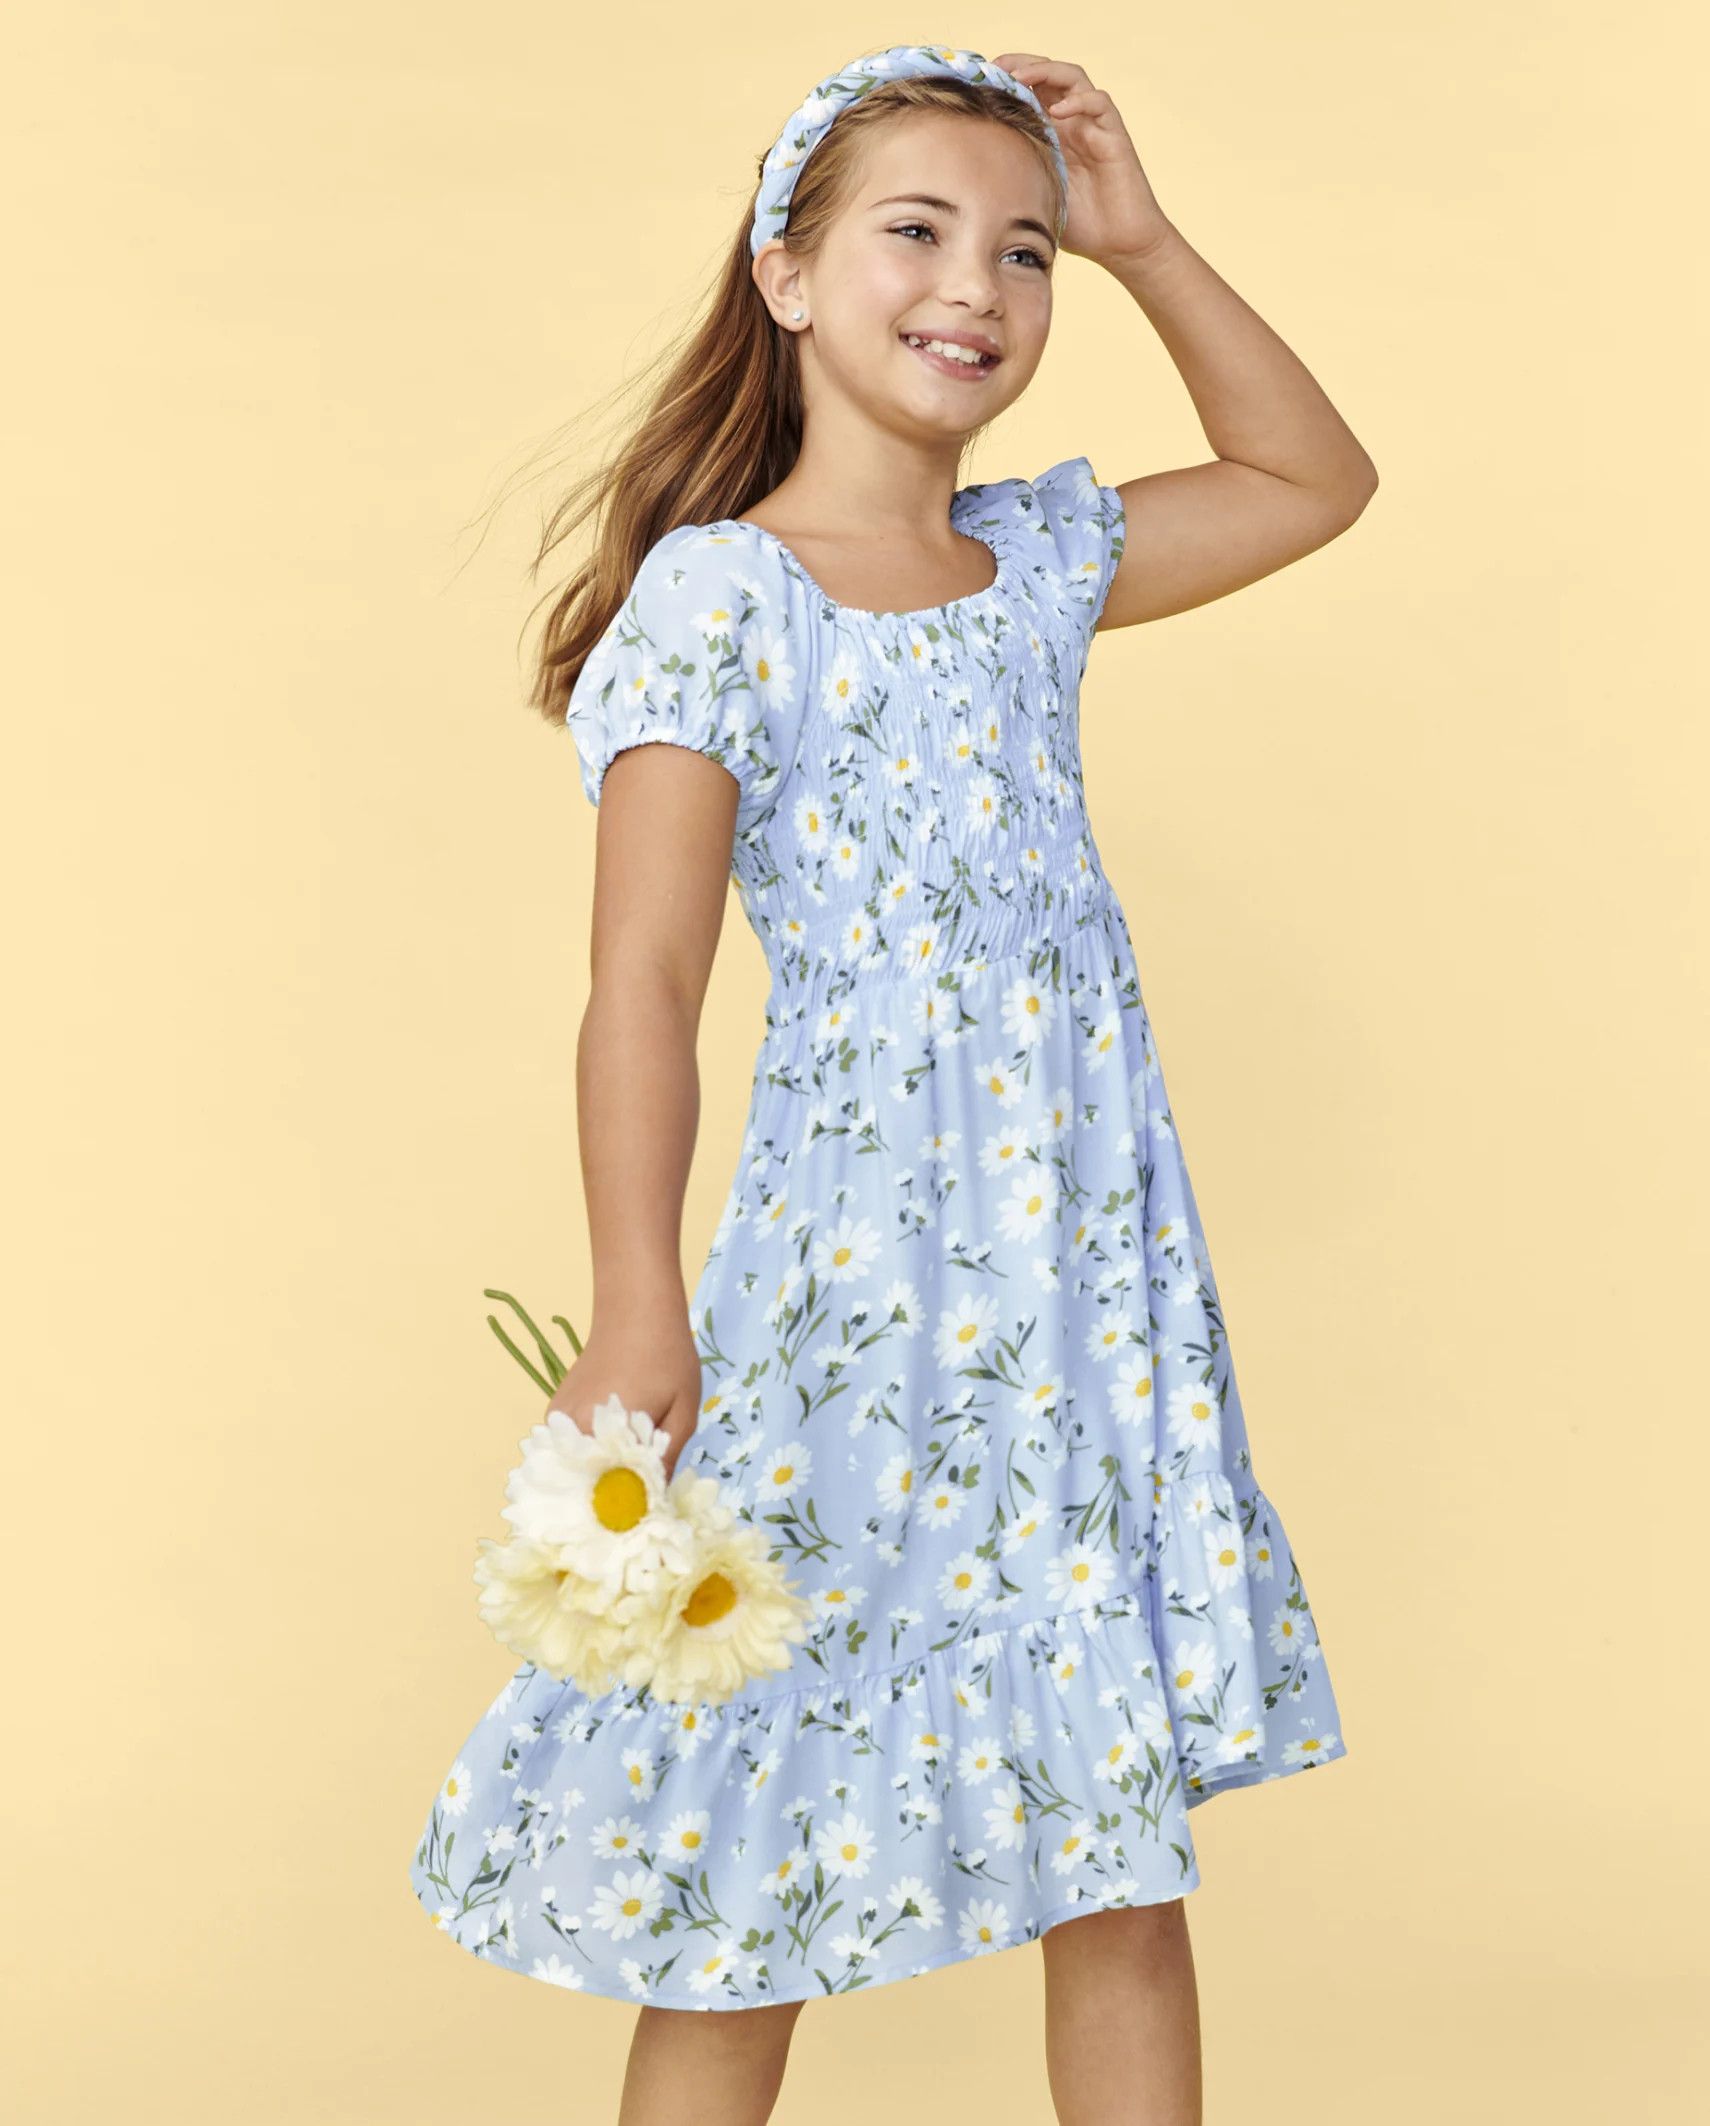 Girls Mommy And Me Floral Tiered Dress - whirlwind | The Children's Place